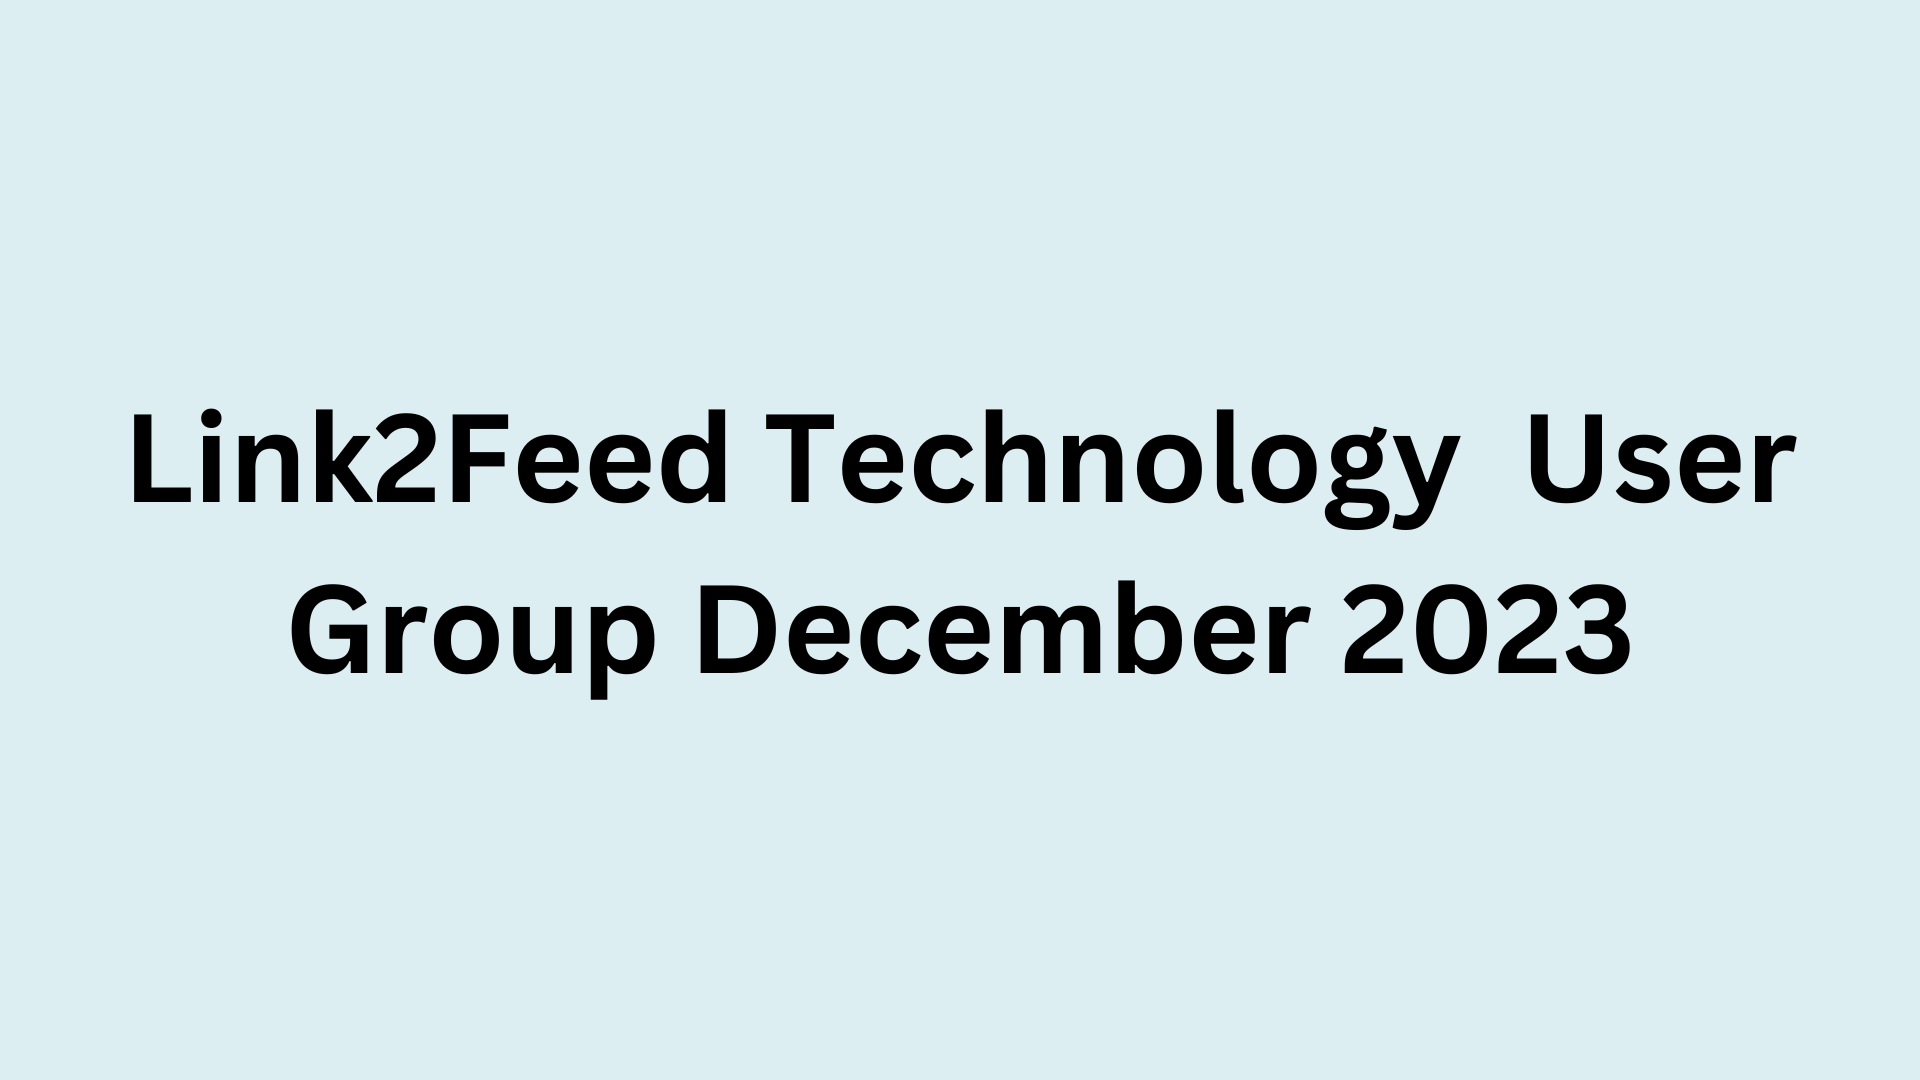 The Link2Feed Technology User Group - December 2023 Meeting